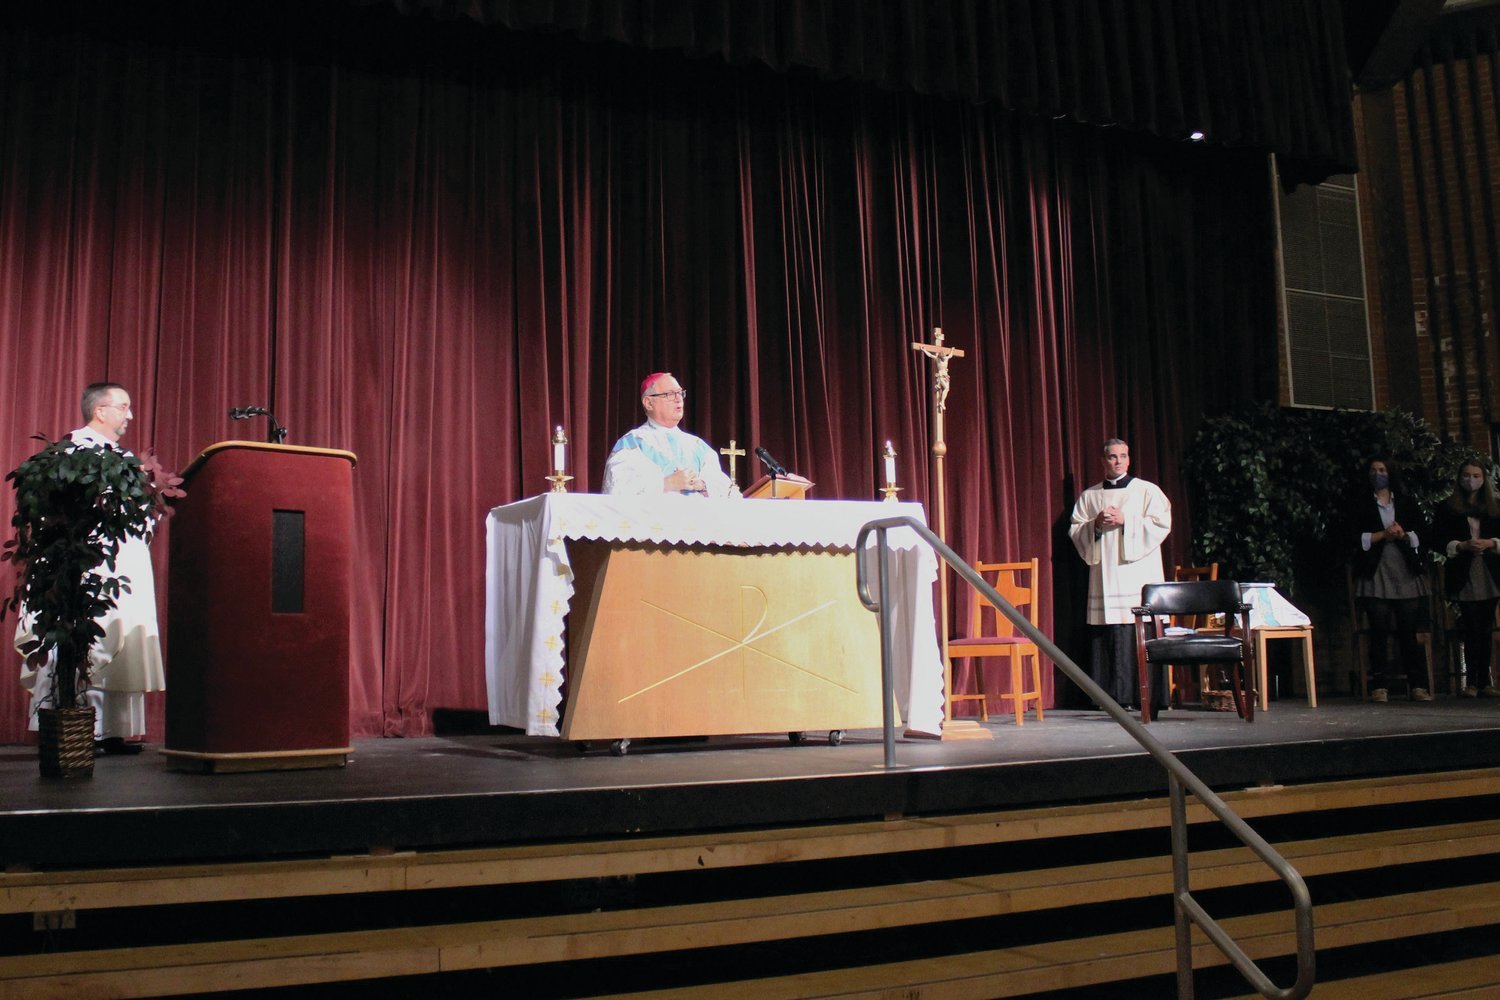 On October 7, the Feast of Our Lady of the Rosary, The Prout School welcomed Bishop Thomas J. Tobin; Father Jeremy Rodrigues, Administrative Secretary to the Bishop; and Daniel Ferris, Superintendent of Catholic Schools to the school’s opening of school Mass. While only seniors were present in the auditorium for the Mass, the entire student body, faculty and staff observed via livestream. After Mass, Bishop Tobin, accompanied by Prout Chaplain Father Carl Fisette, blessed the interior of the school while the seniors processed outdoors to receive their Prout pin, a school tradition, to pin on their senior blazers.